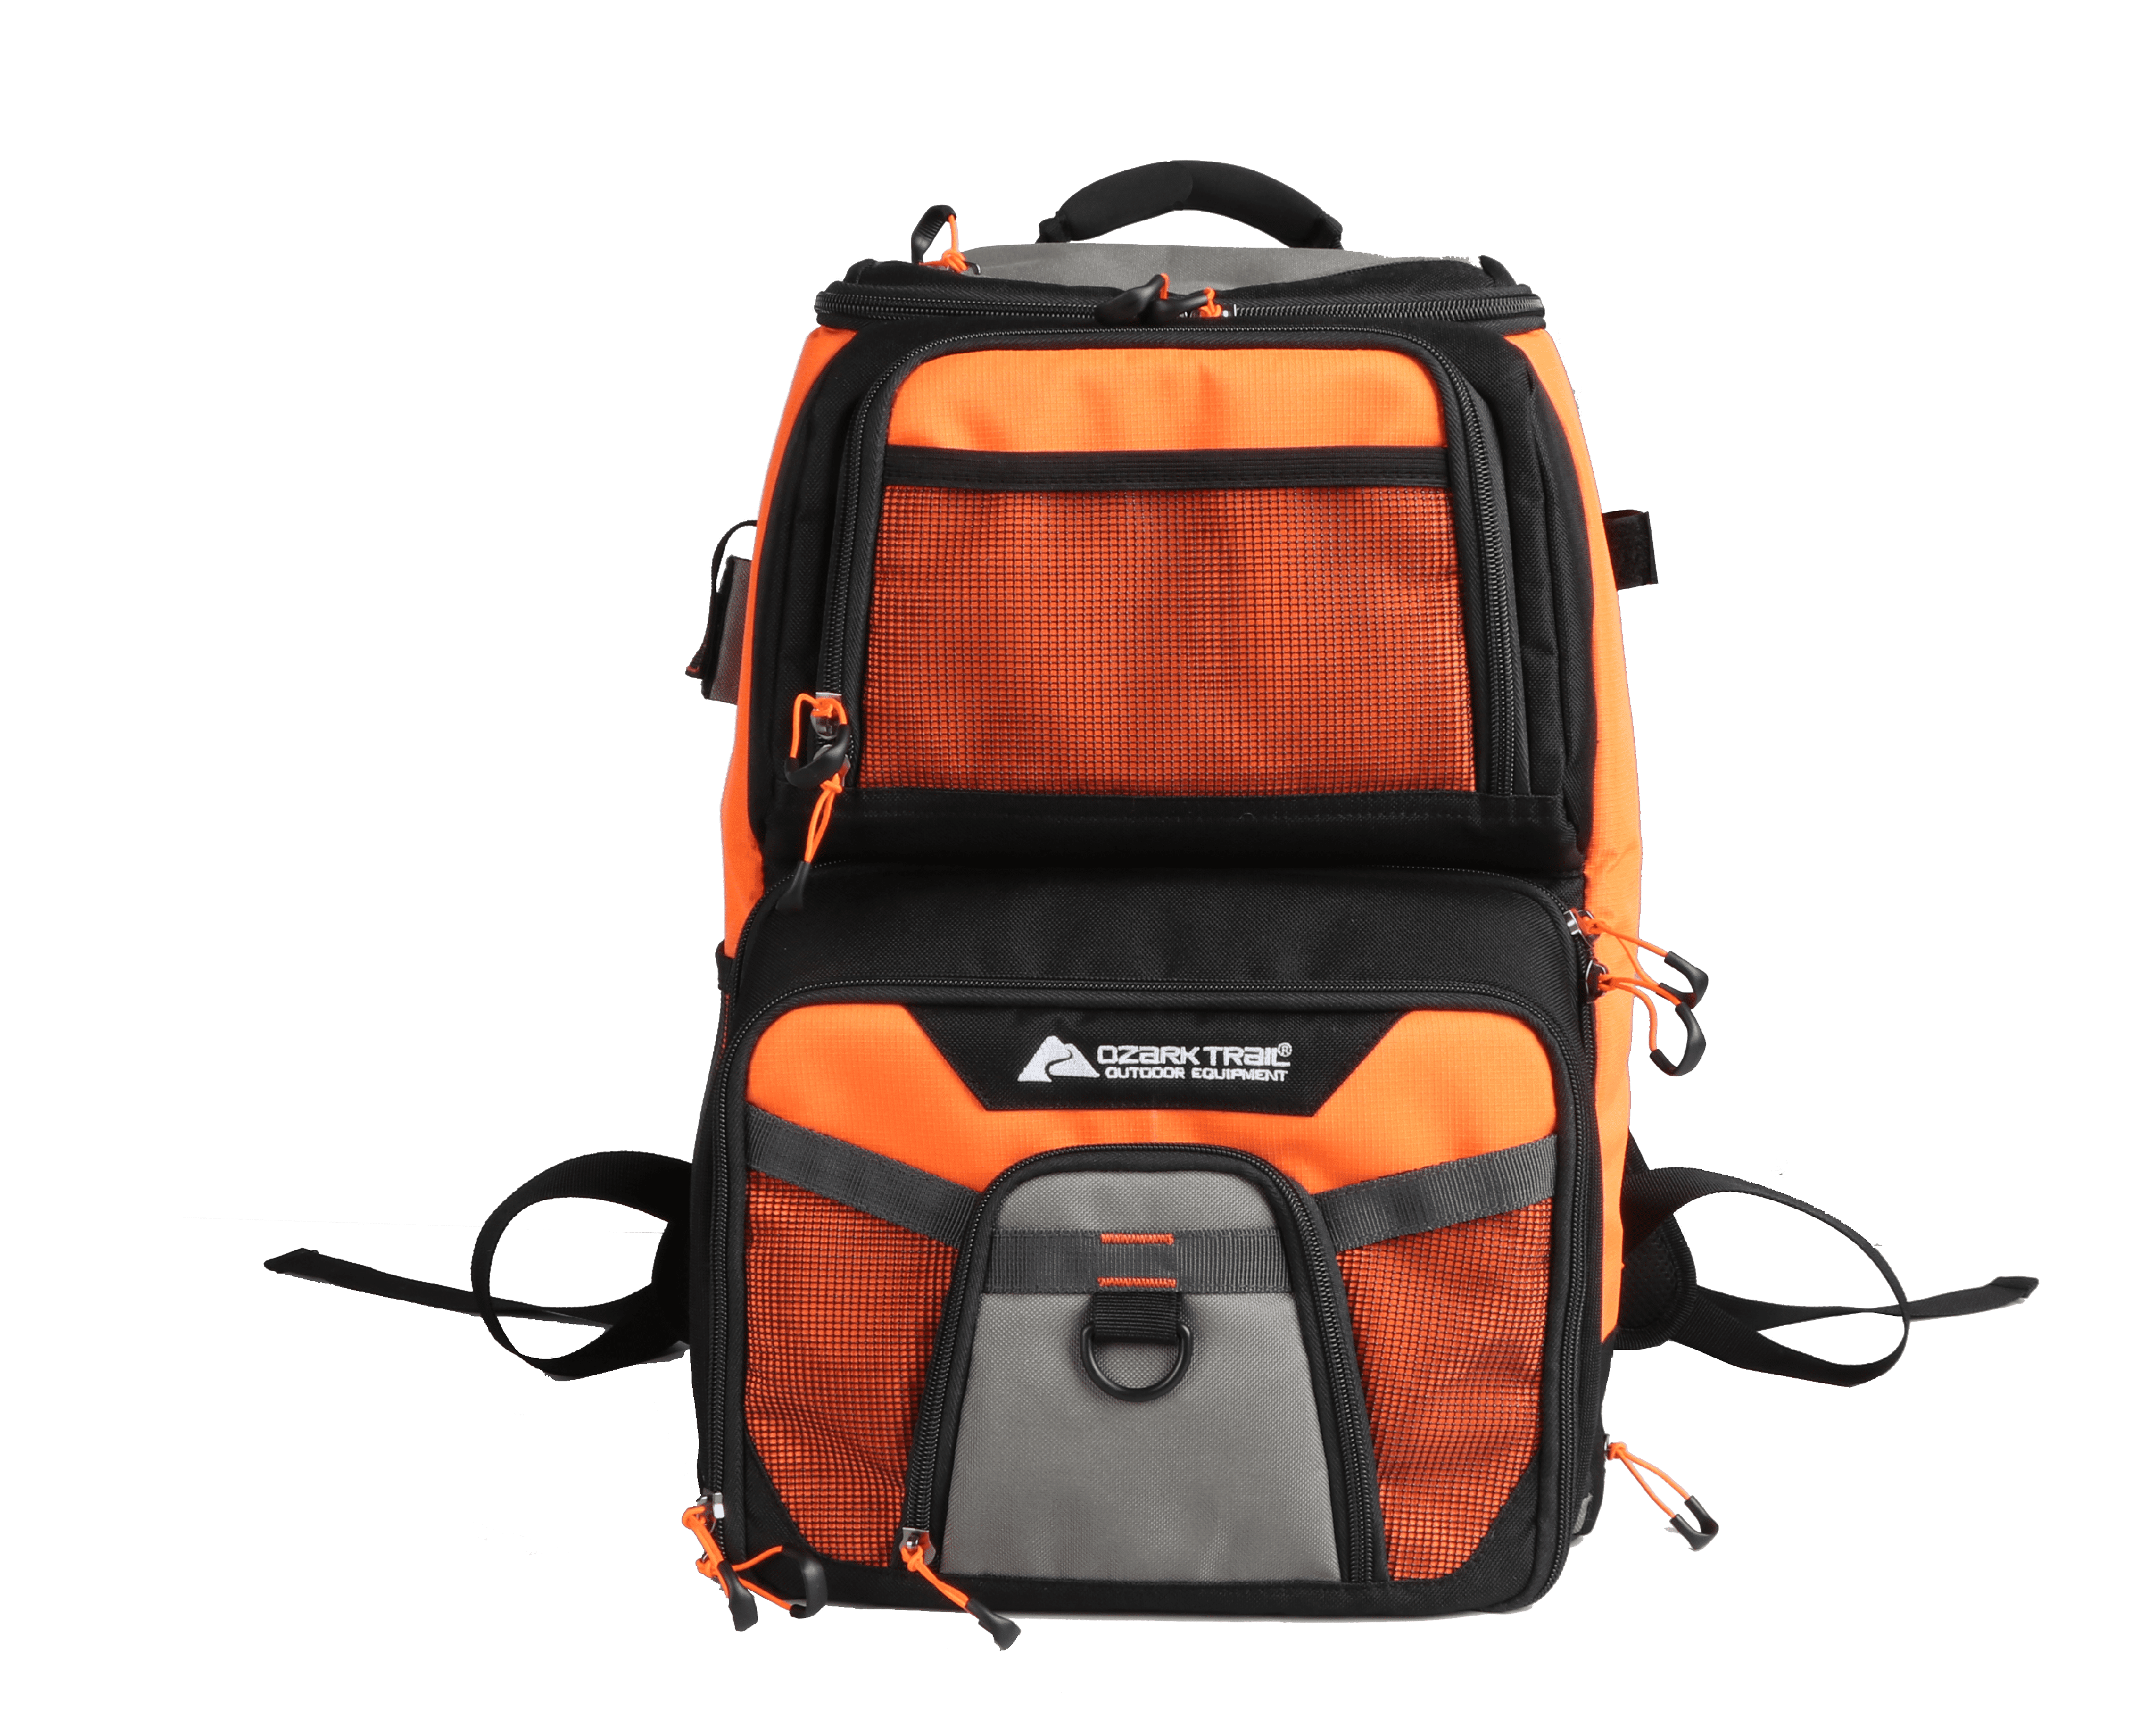 Must Have Tackle Box Under $20 - Ozark Trail 360 Tackle Bag Review